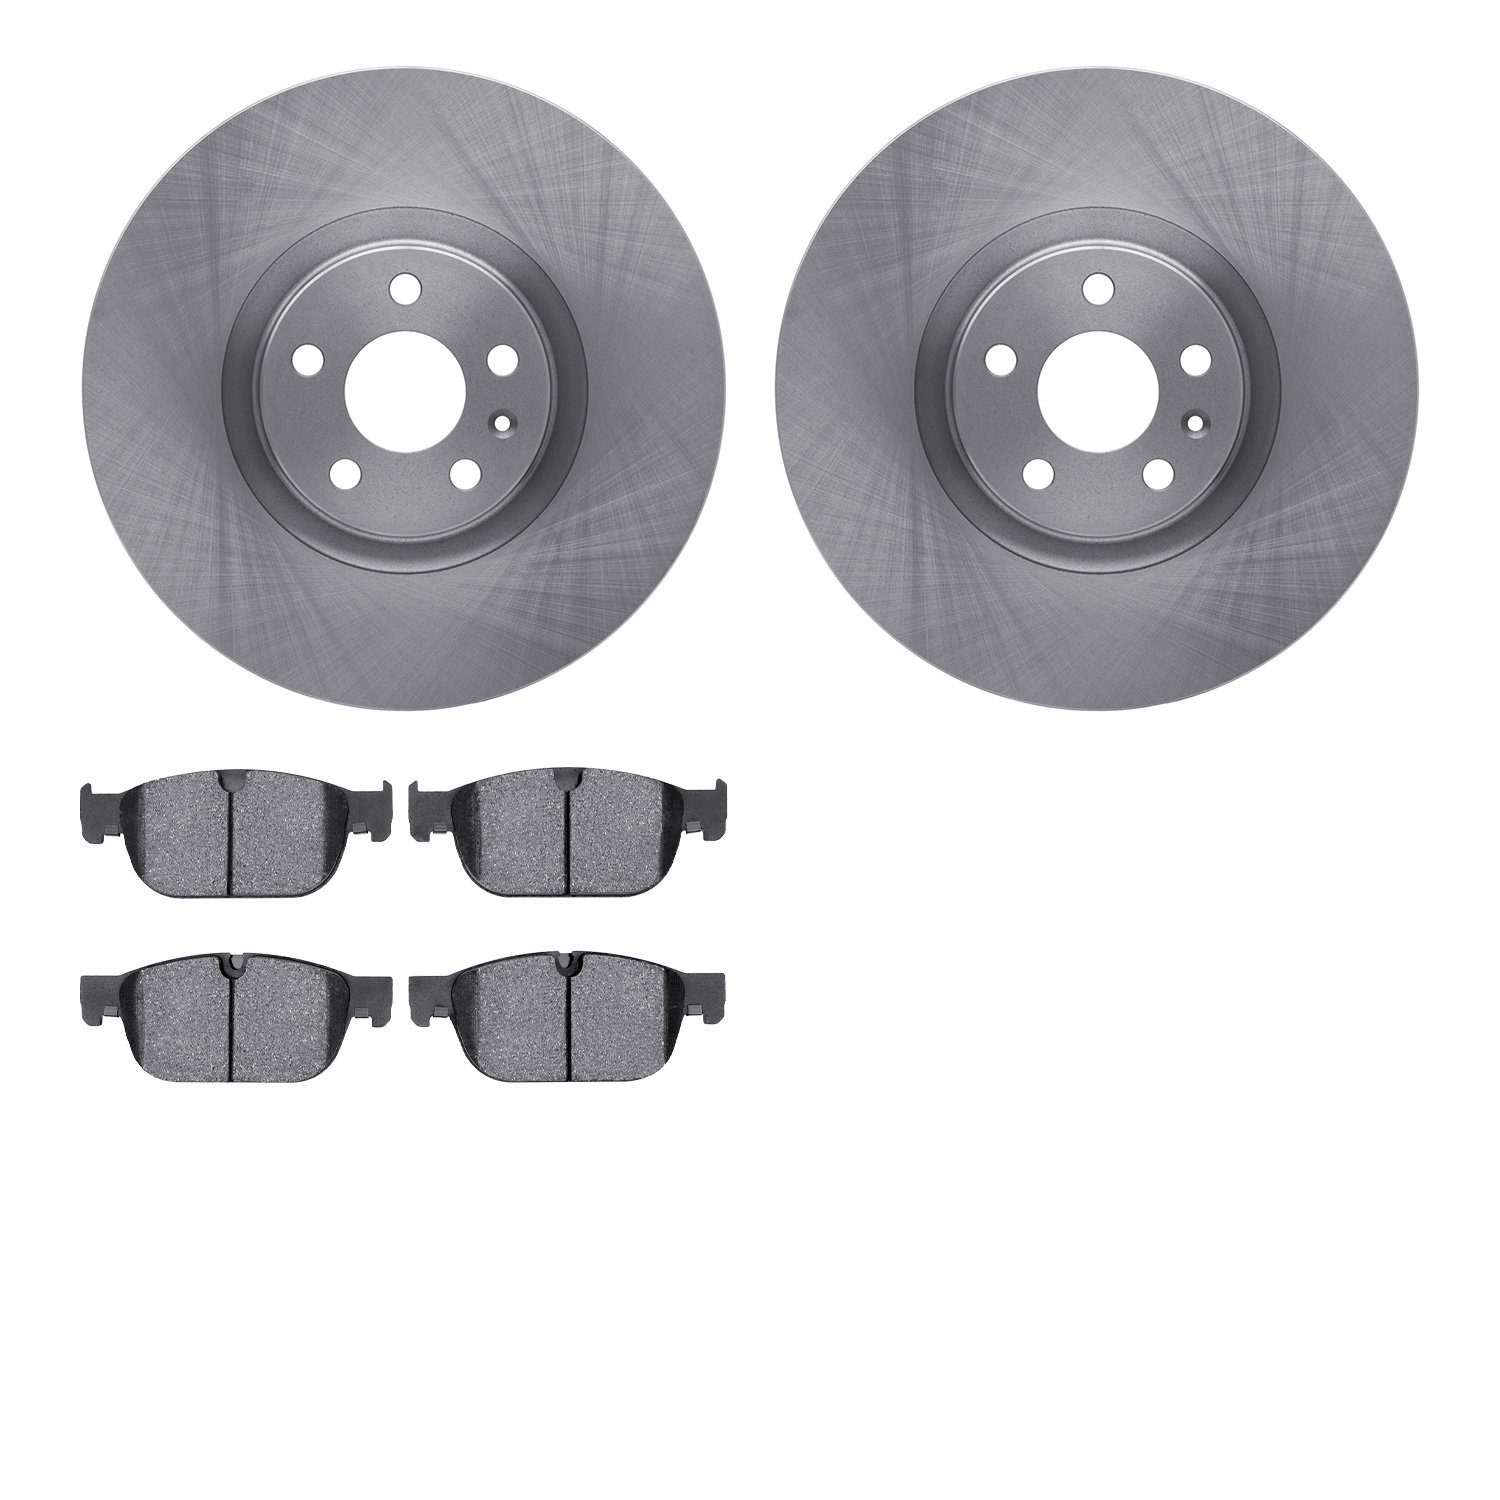 6302-27074 Brake Rotors with 3000-Series Ceramic Brake Pads Kit, Fits Select Multiple Makes/Models, Position: Front